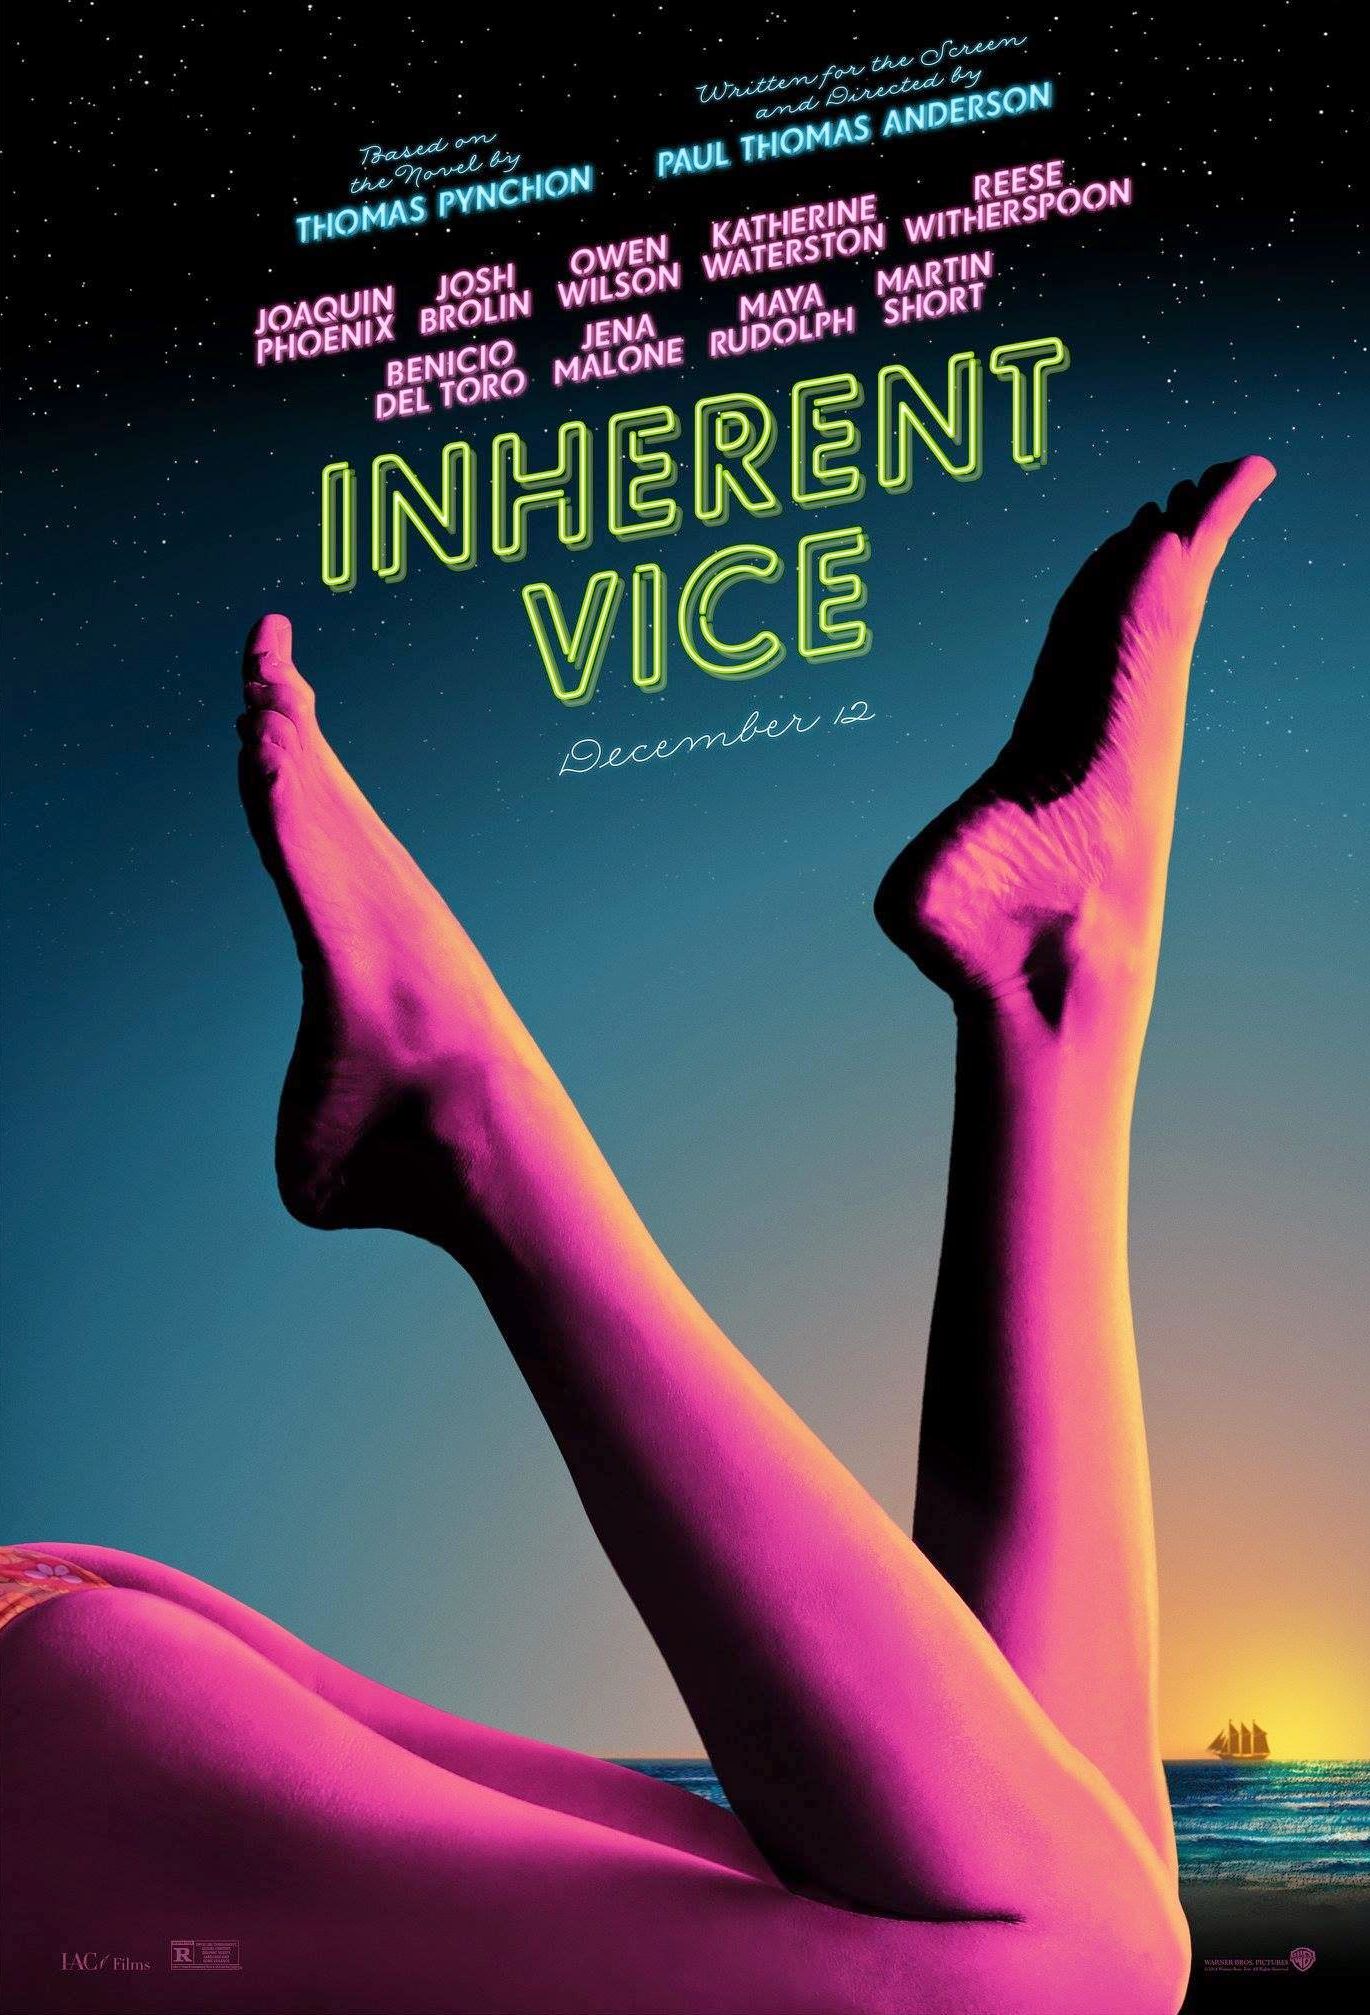 Inherent Vice legs poster